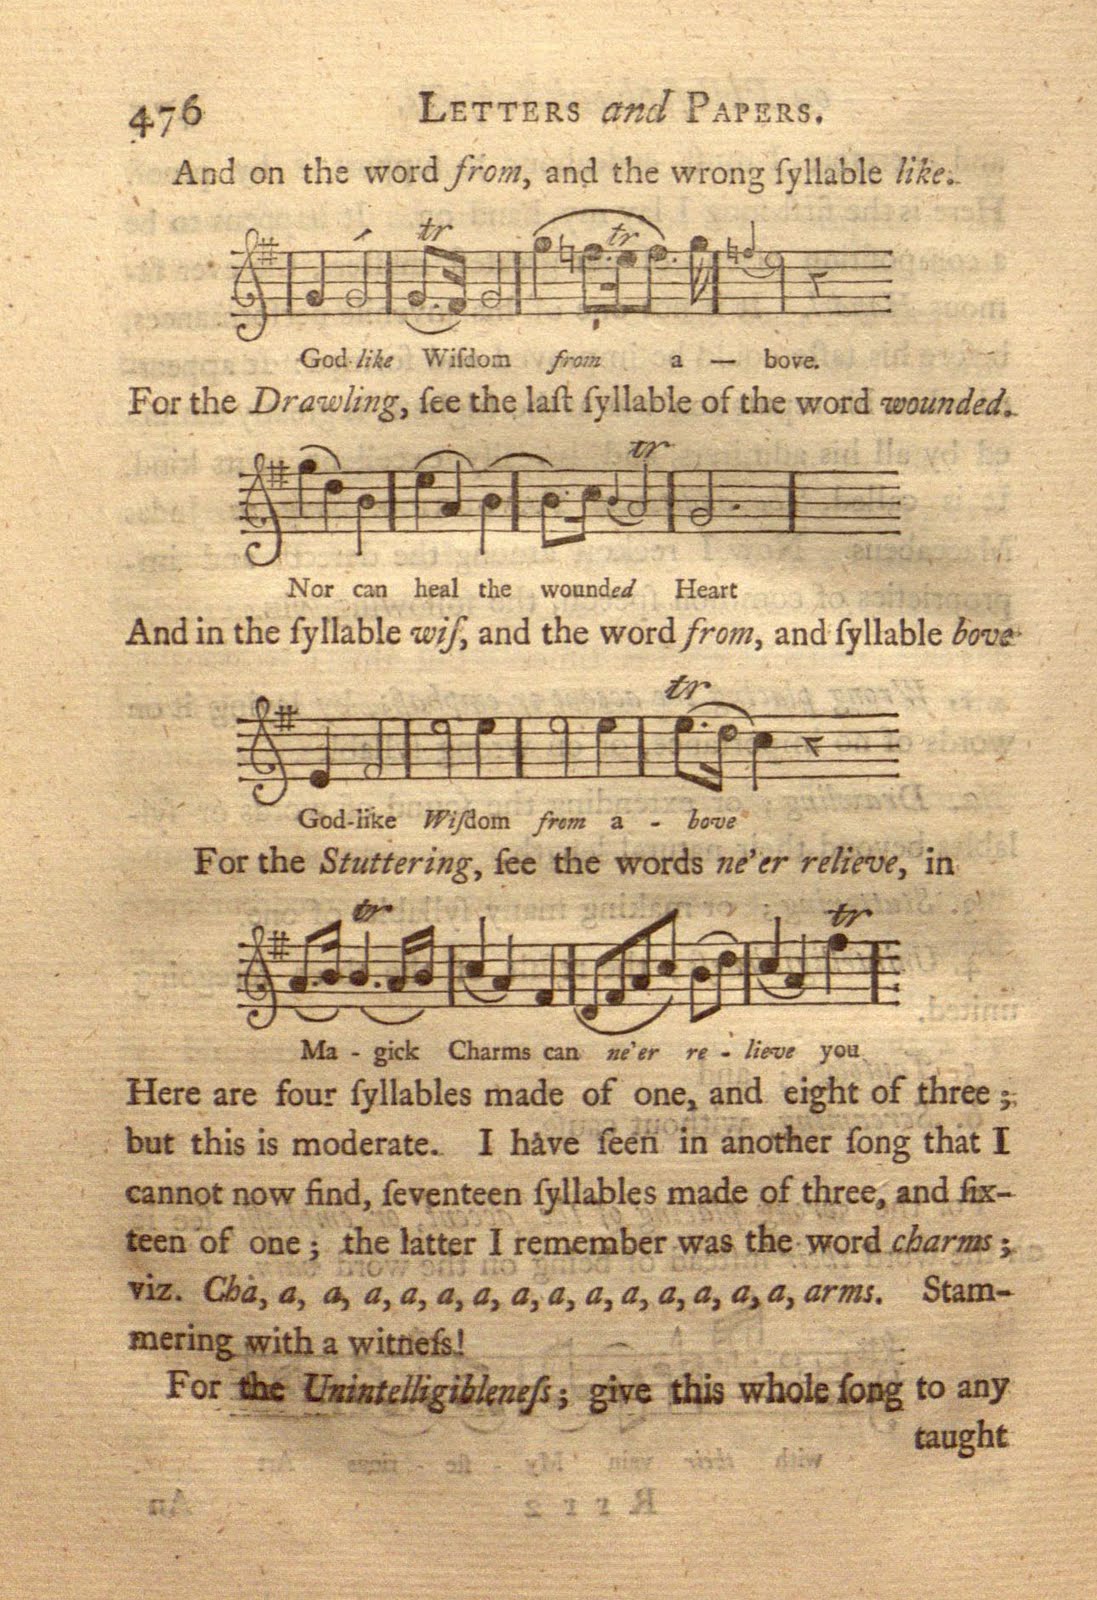 Page 476 of Experiments and Observations on Electricity Made at Philadelphia in America (c. 1751) from the chapter "Letters and Papers" with musical notation and explanations